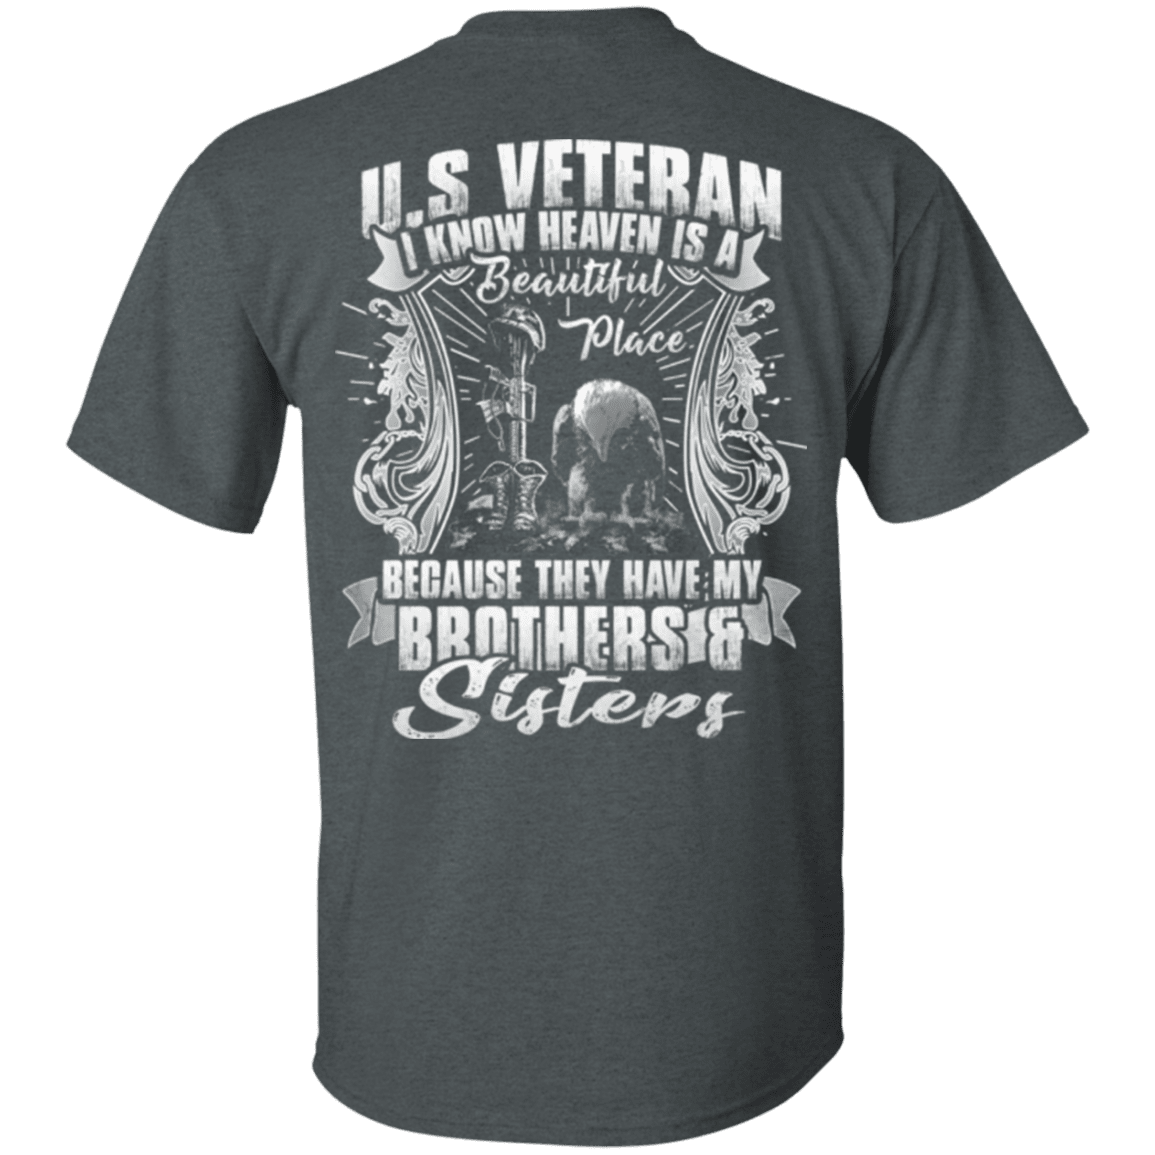 Military T-Shirt "Heaven Is The Beautiful Place With Brothers And Sisters Veteran"-TShirt-General-Veterans Nation